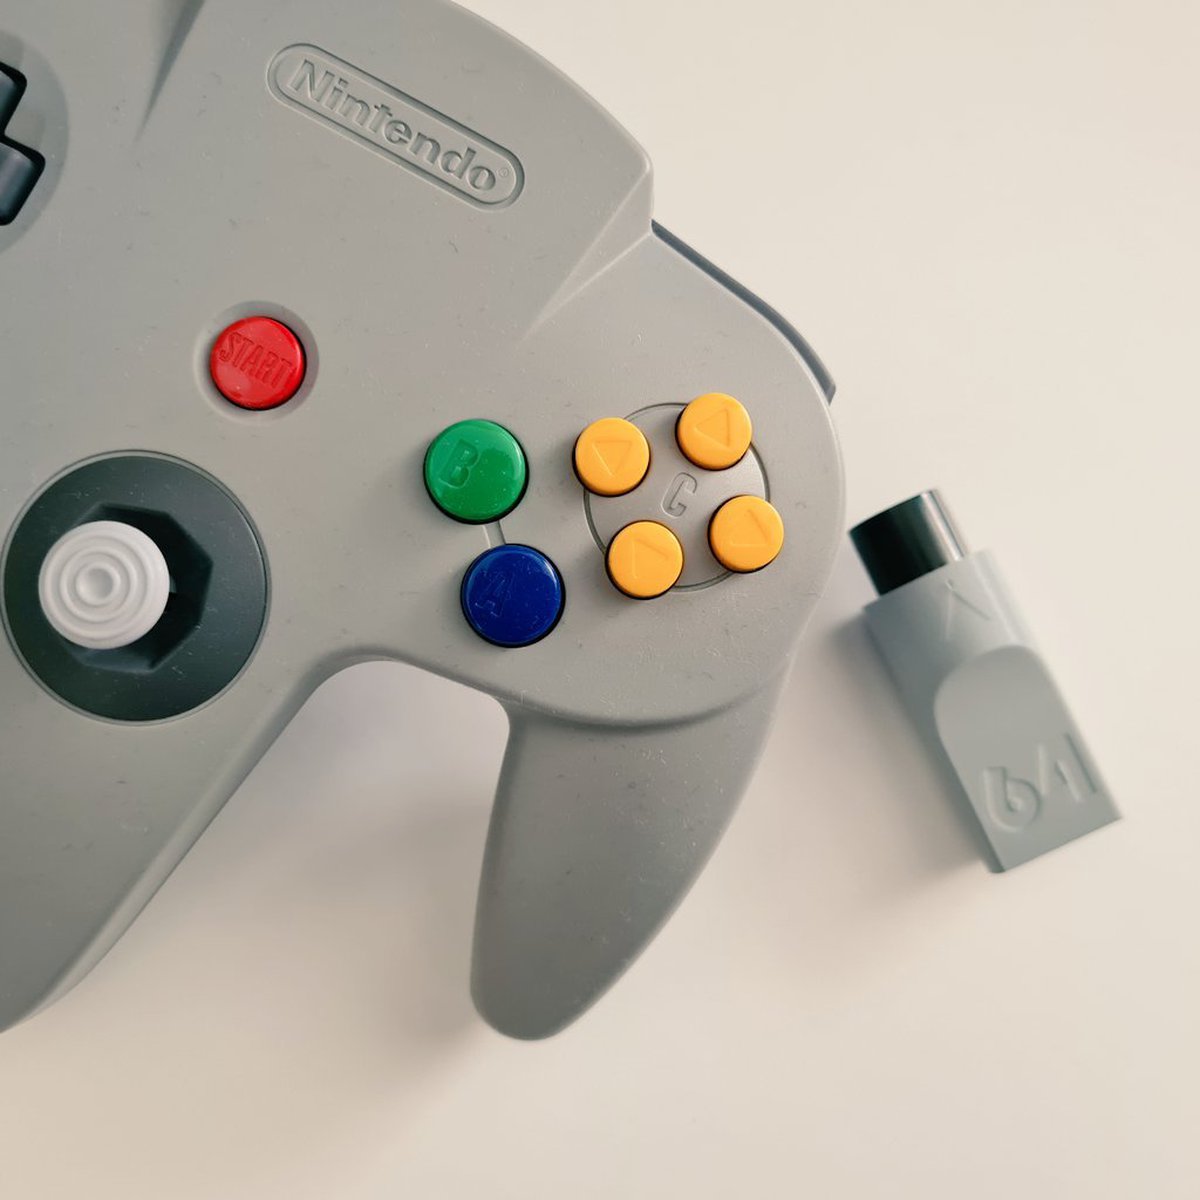 Nintendo 64 Controller Receiver from RetroTime Tindie